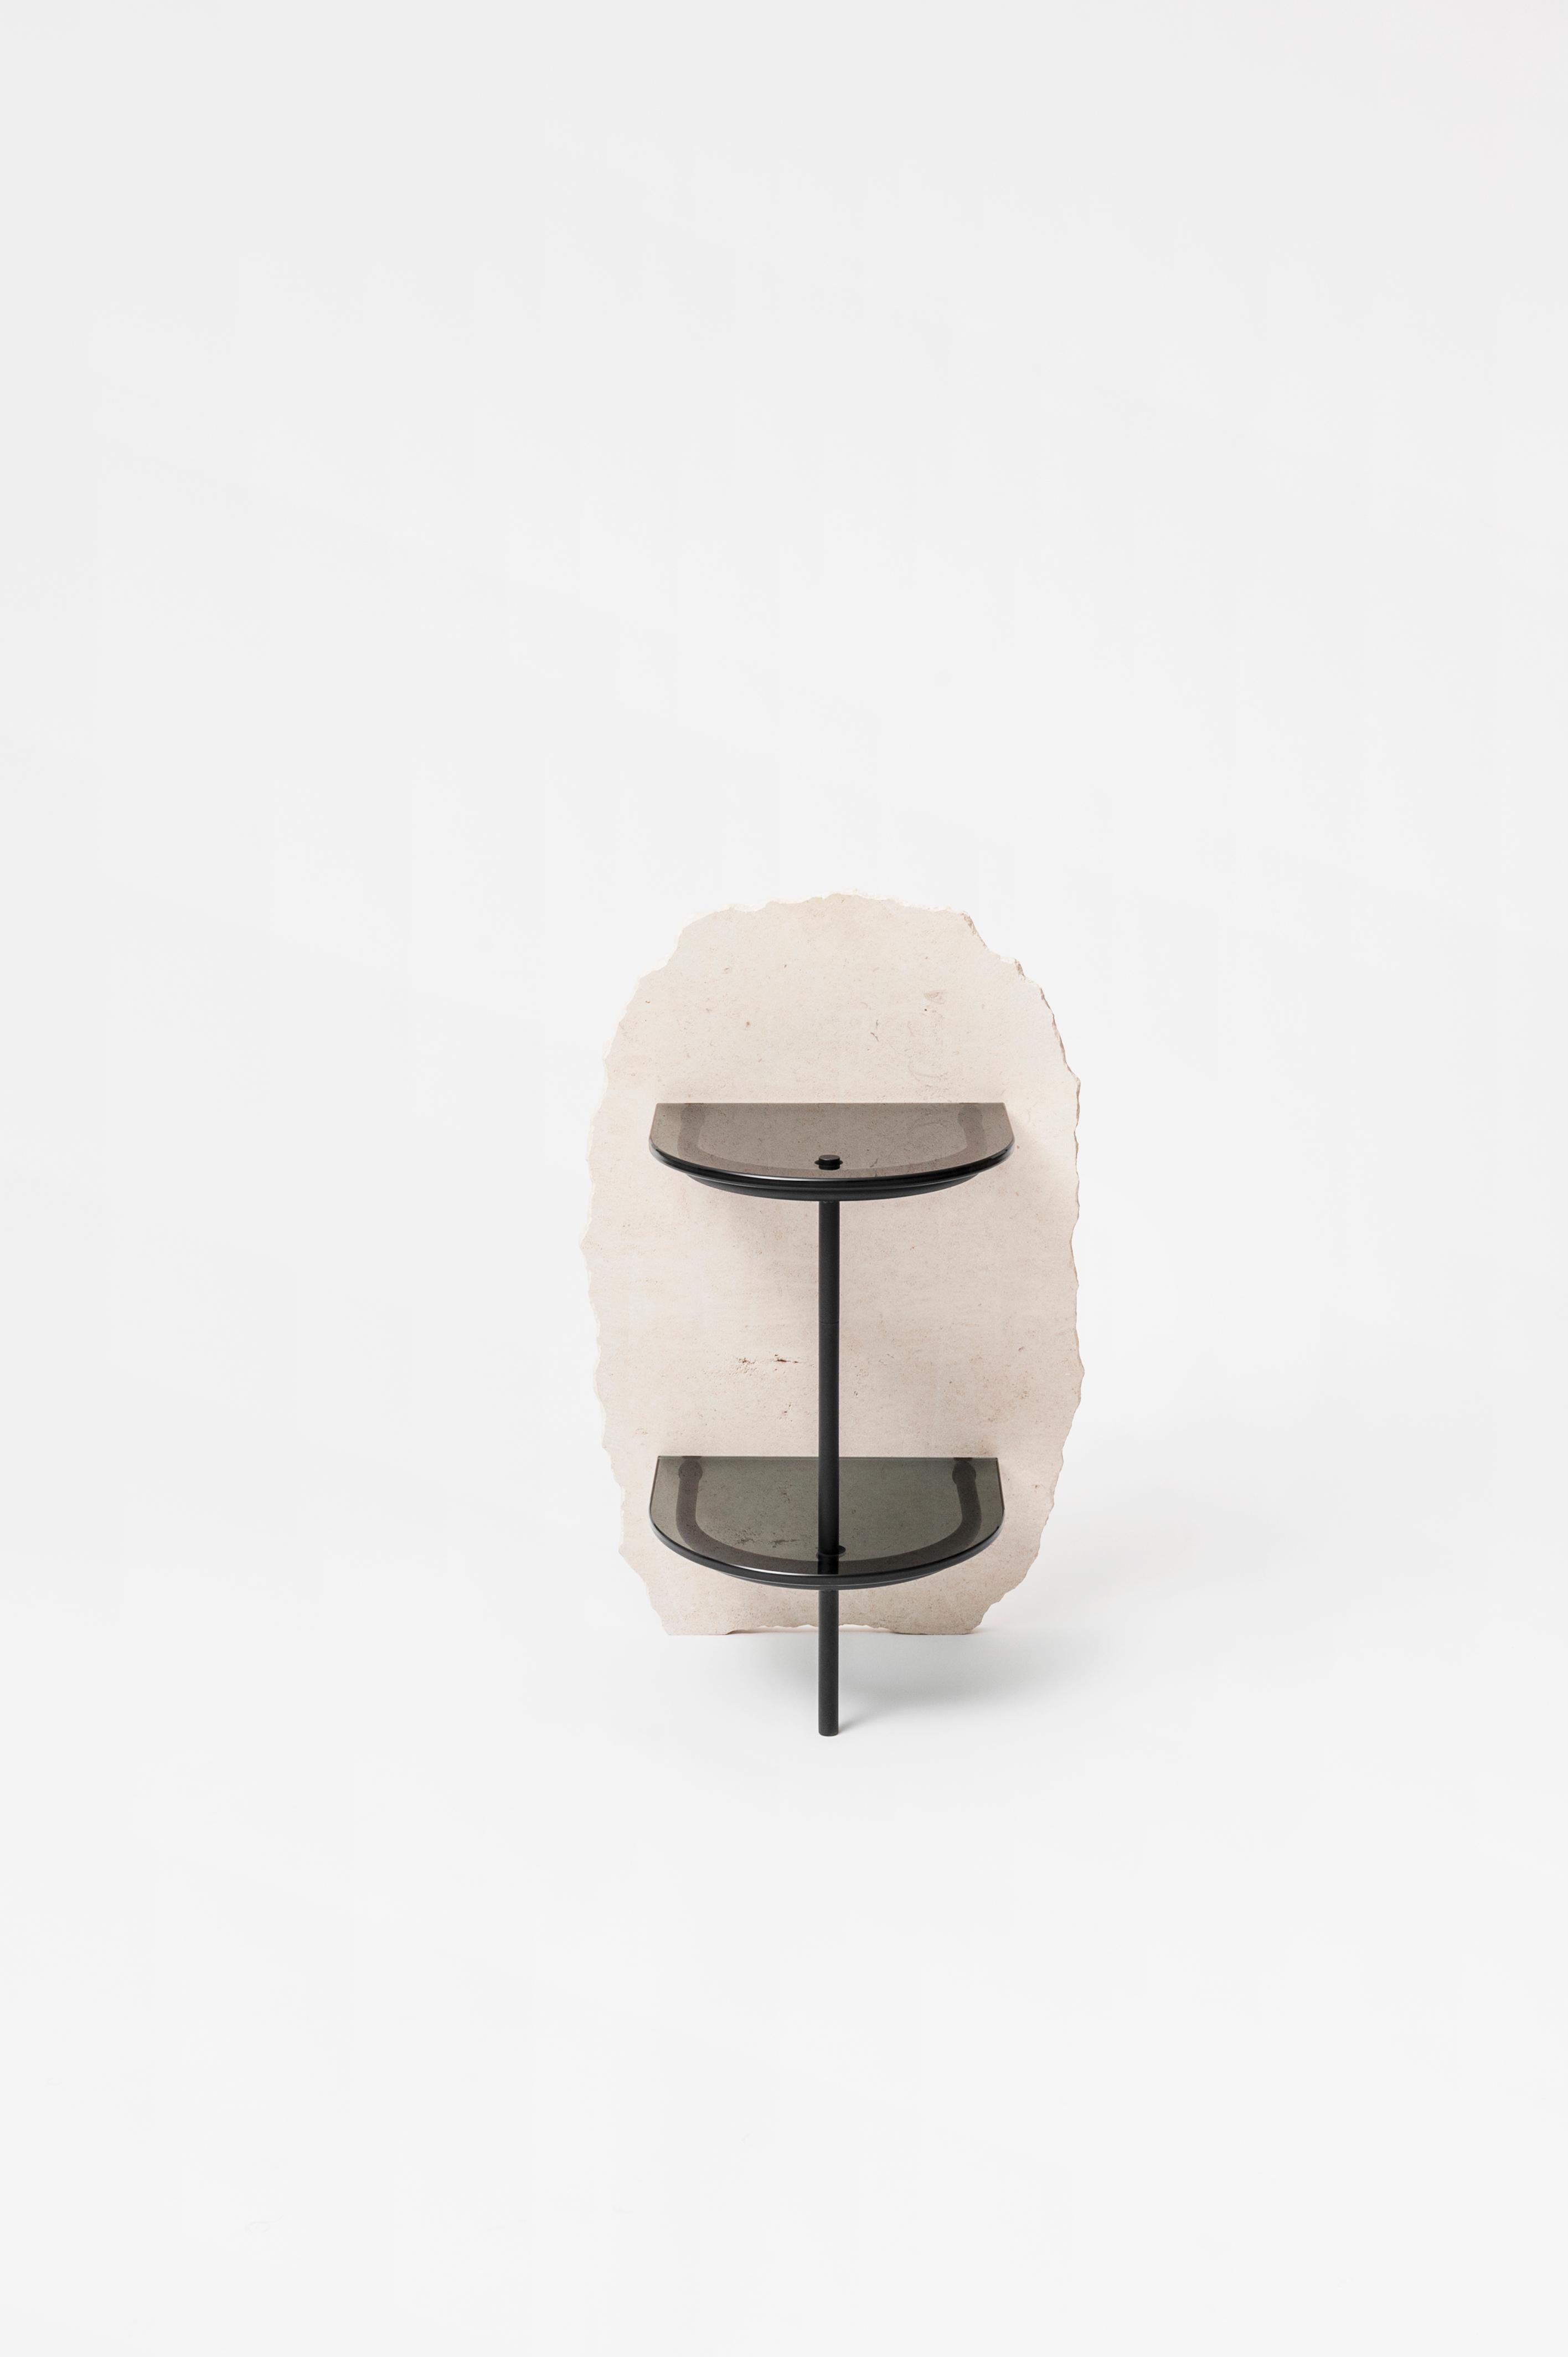 Stoique stole side table signed by Frédéric Saulou
Materials: Ornemental stone, grey glass, metal.
Dimensions : H 65 x 43 x 30 cm.
Weight : about 60 kg 
Limited edition : 1 / 8 

